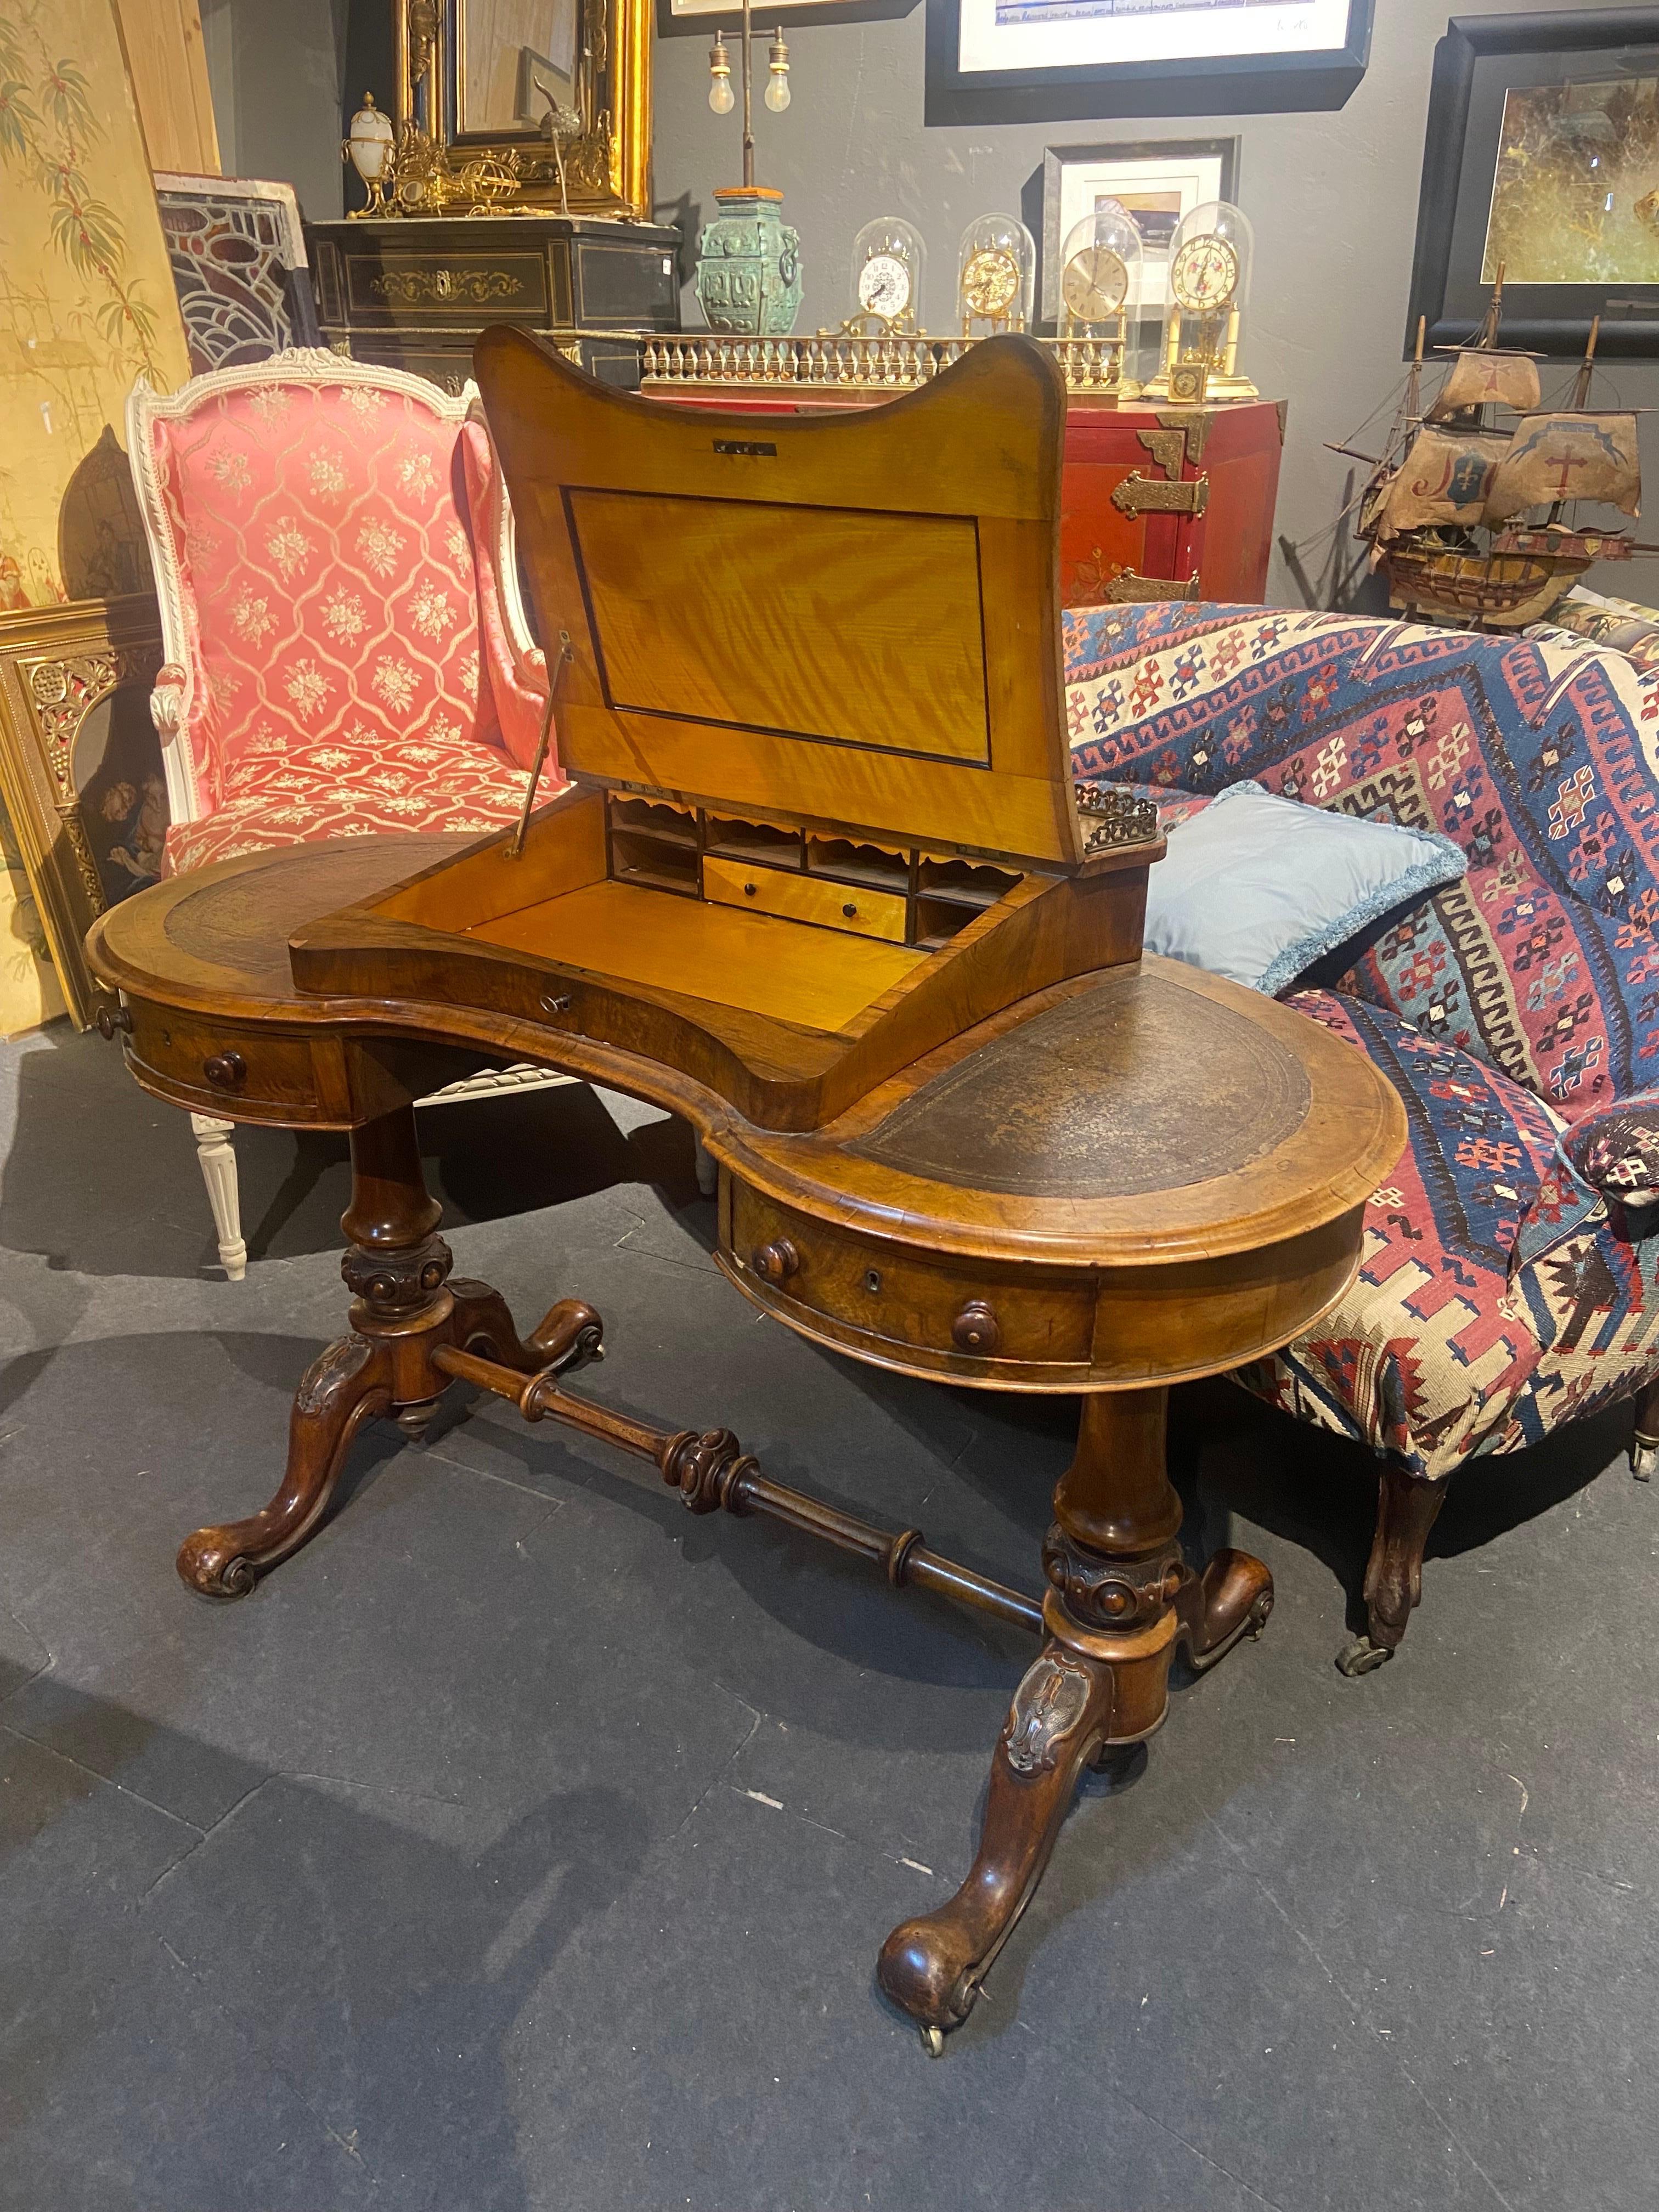 French kidney-shaped veneer writing table, topped with a leather-covered desk and opening with two belt drawers.
Molded base joined by spacer and finished with casters. Decorated with foliage, openwork brass gallery. The piece is in good overall